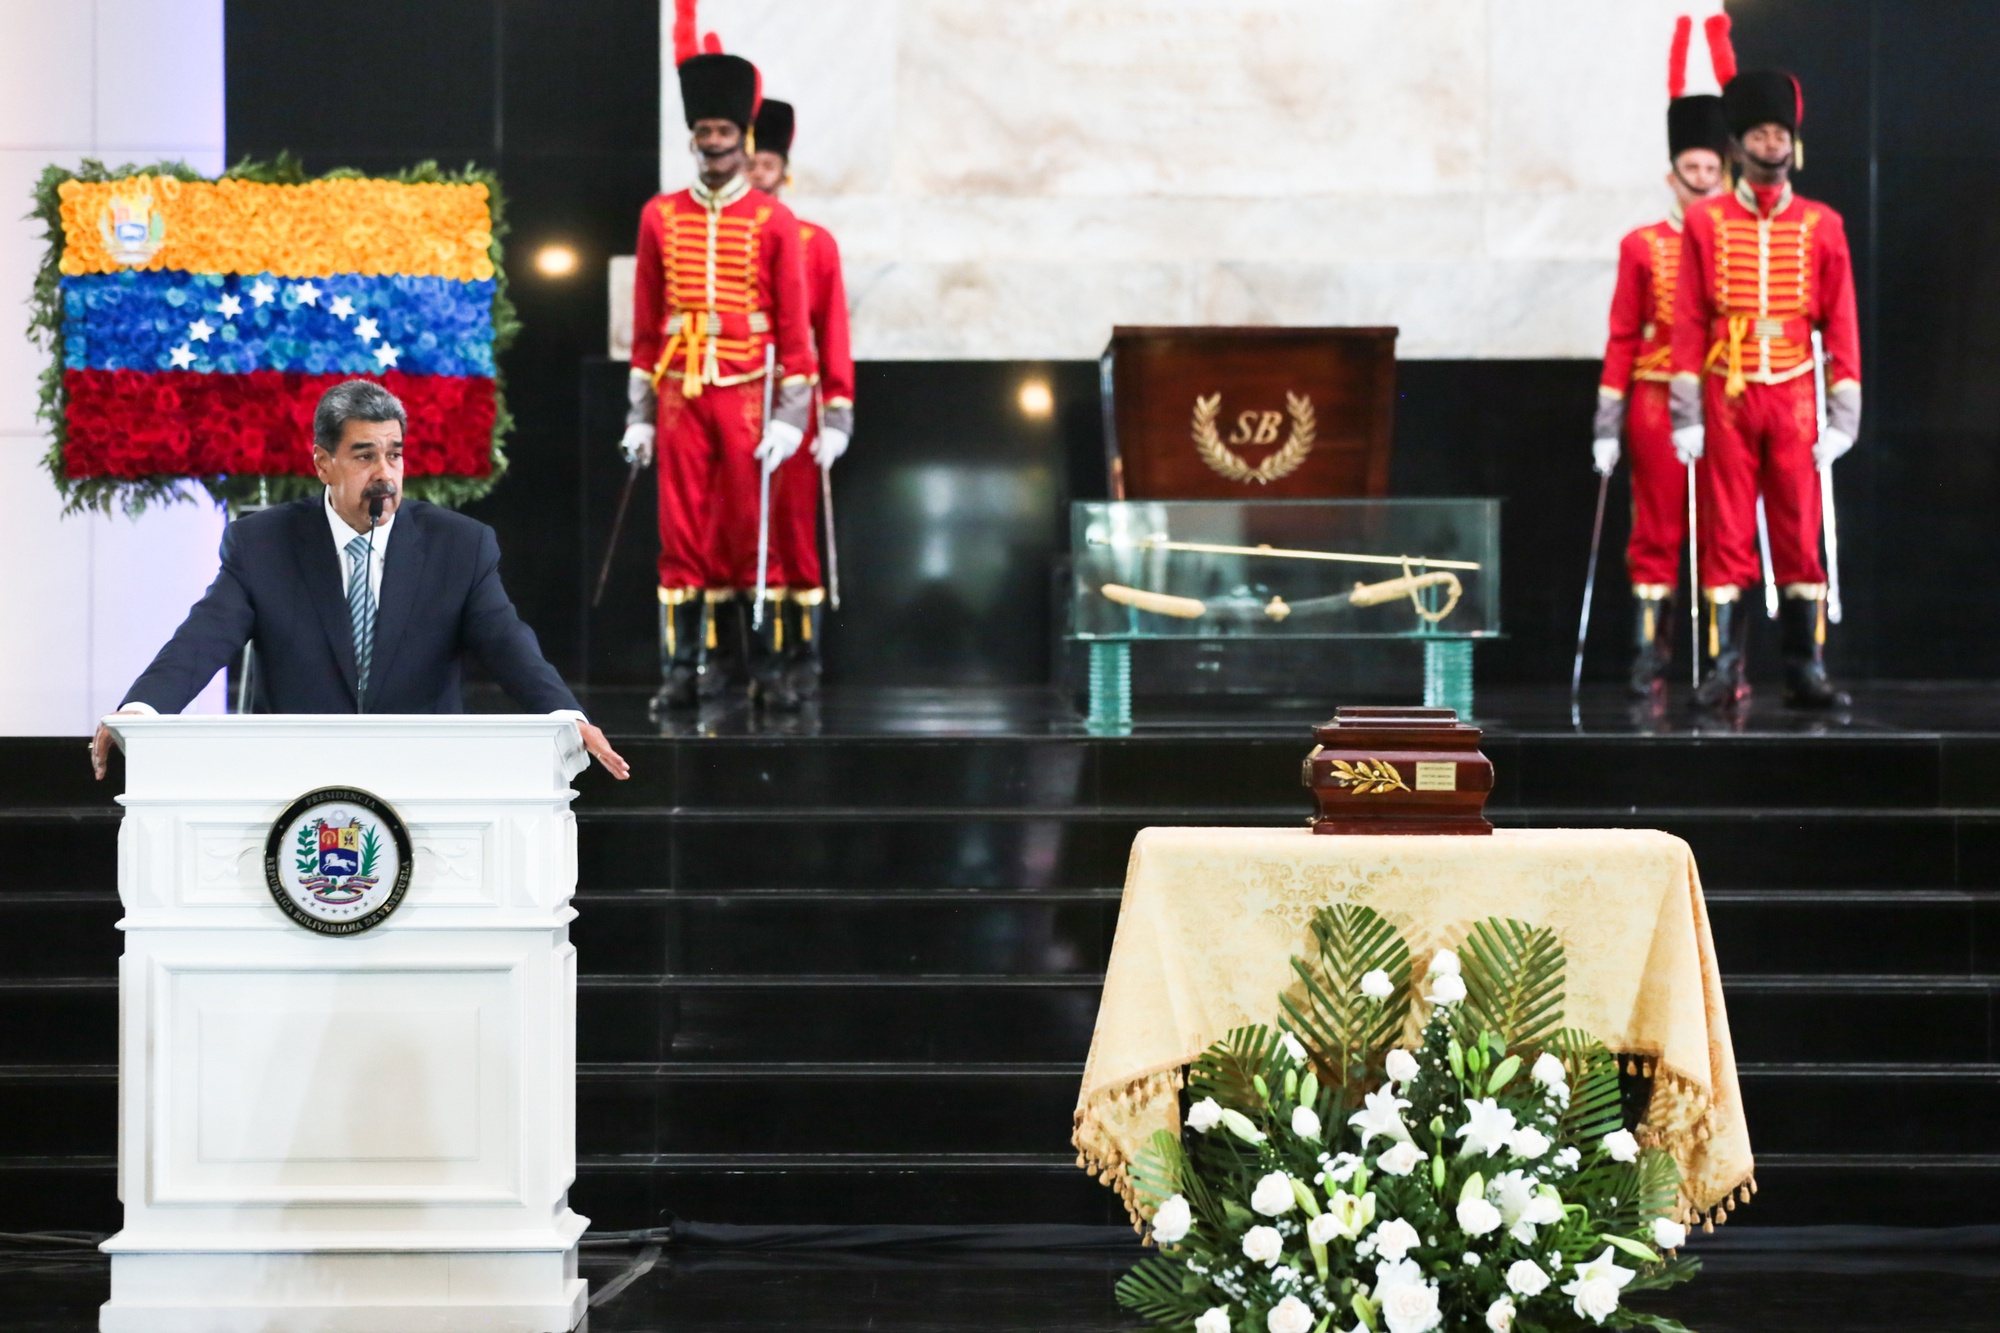 epa11433578 A handout photo made available by the Miraflores Palace shows the President of Venezuela (L), Nicolas Maduro, at a government event in Caracas, Venezuela, 23 June 2024. Venezuela moved the remains of Cristobal Mendoza, the country&#039;s first president after independence, to the National Pantheon in Caracas, also marking the 252nd anniversary of his birth.  EPA/MIRAFLORES PALACE / HANDOUT ONLY AVAILABLE TO ILLUSTRATE THE ACCOMPANYING NEWS (MANDATORY CREDIT) HANDOUT EDITORIAL USE ONLY/NO SALES HANDOUT EDITORIAL USE ONLY/NO SALES